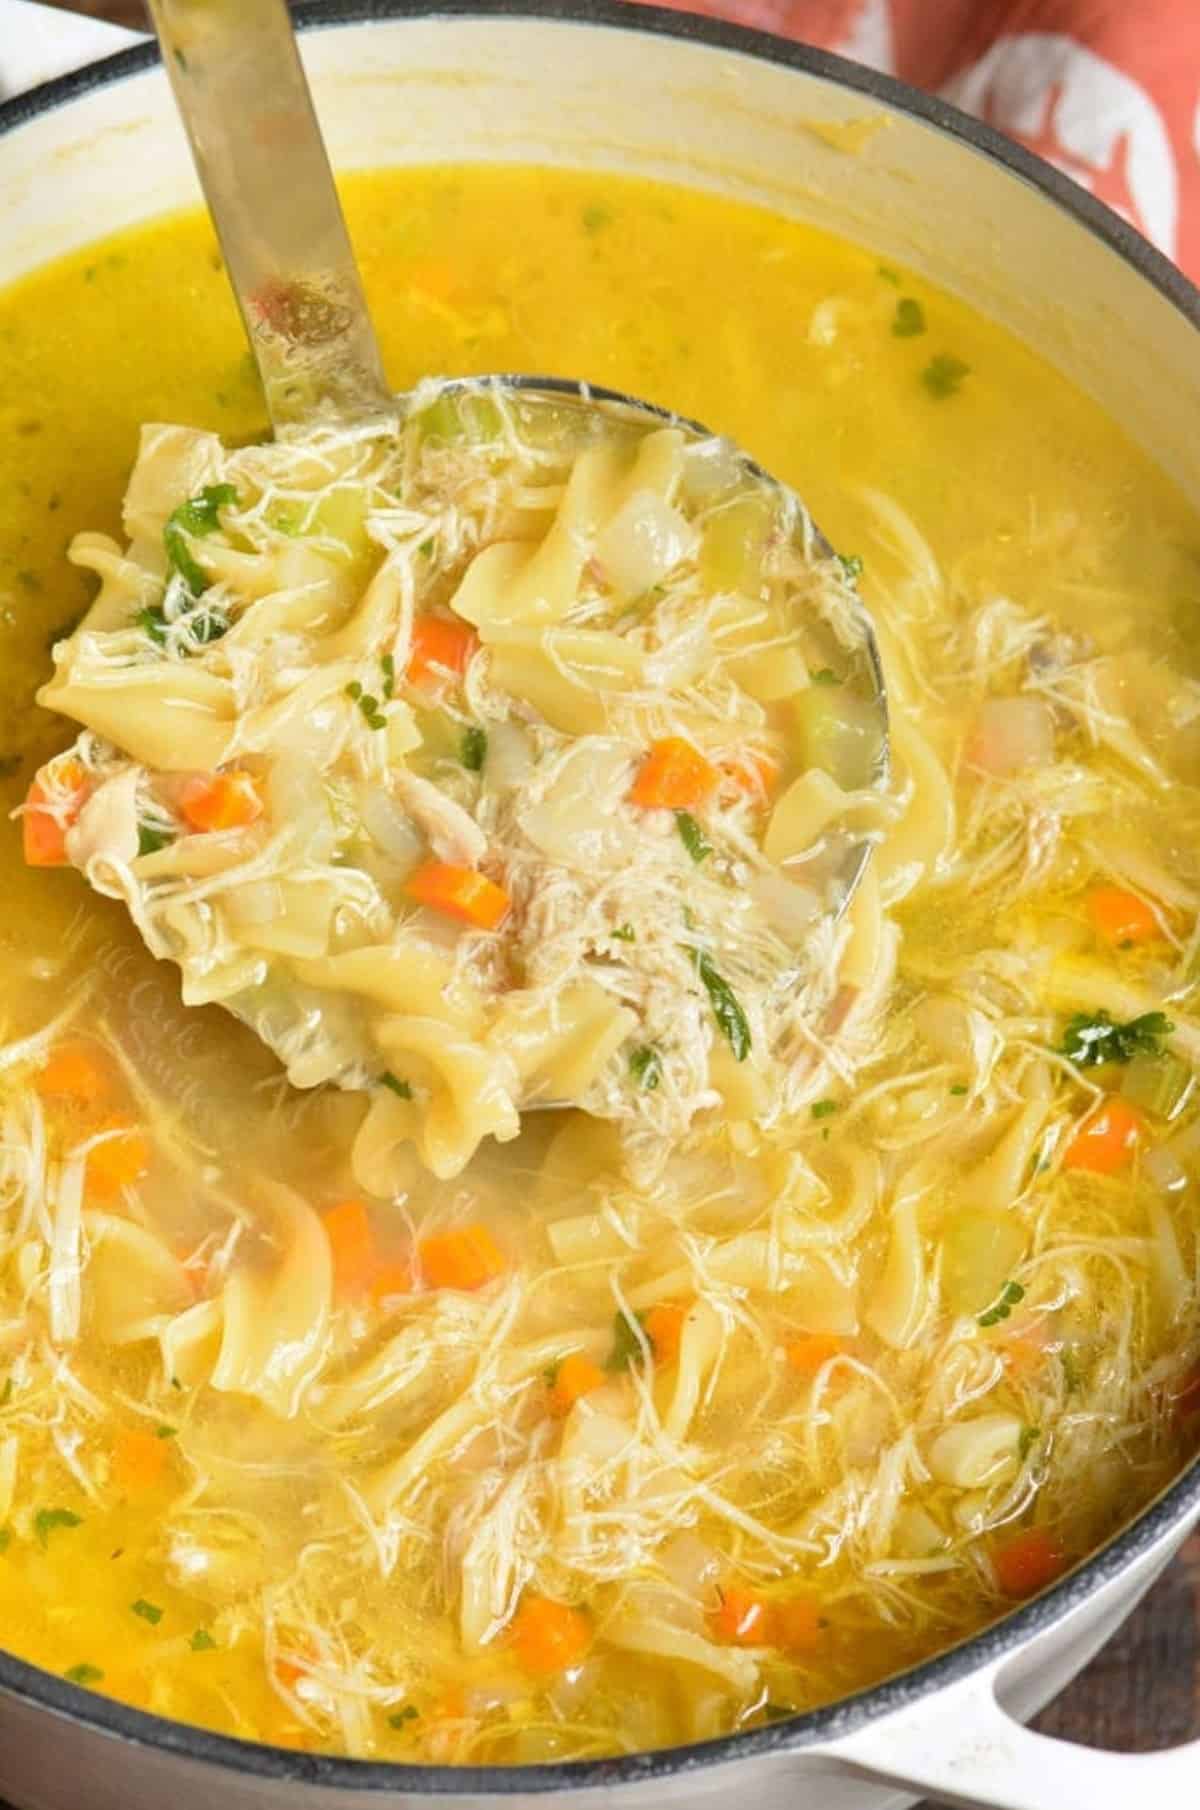 Homemade Chicken Noodle Soup - Will Cook For Smiles